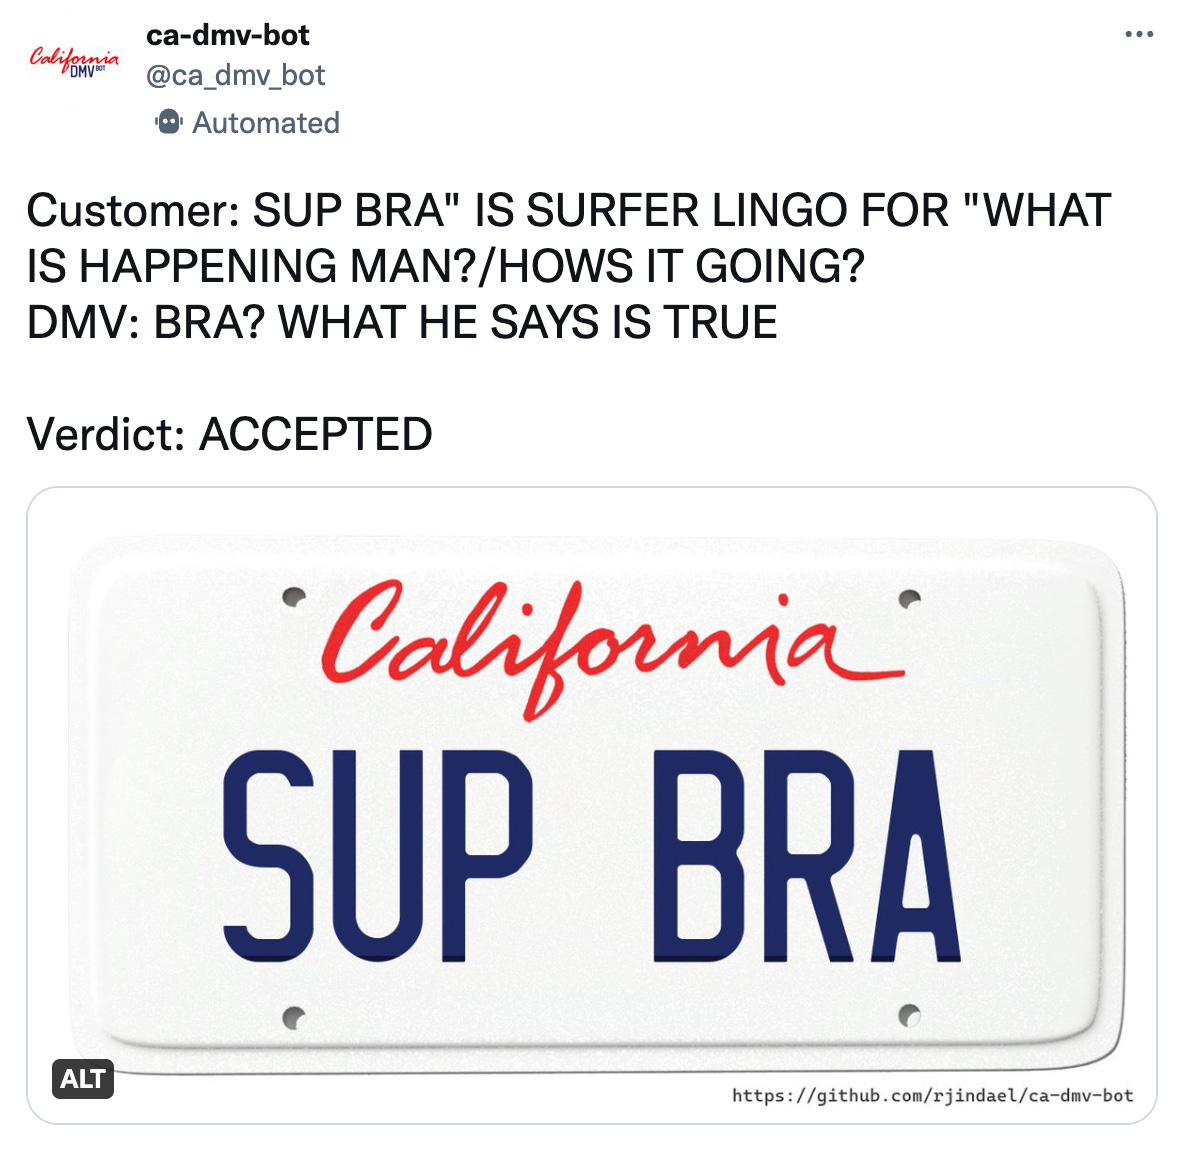 Tweet from @ca_dmv_bot reading Customer: SUP BRA IS SURFER LINGO FOR WHAT IS HAPPENING MAN?/HOWS IT GOING? DMV: BRA? WHAT HE SAYS IS TRUE Verdict: ACCEPTED with image of california license plate reading SUP BRA